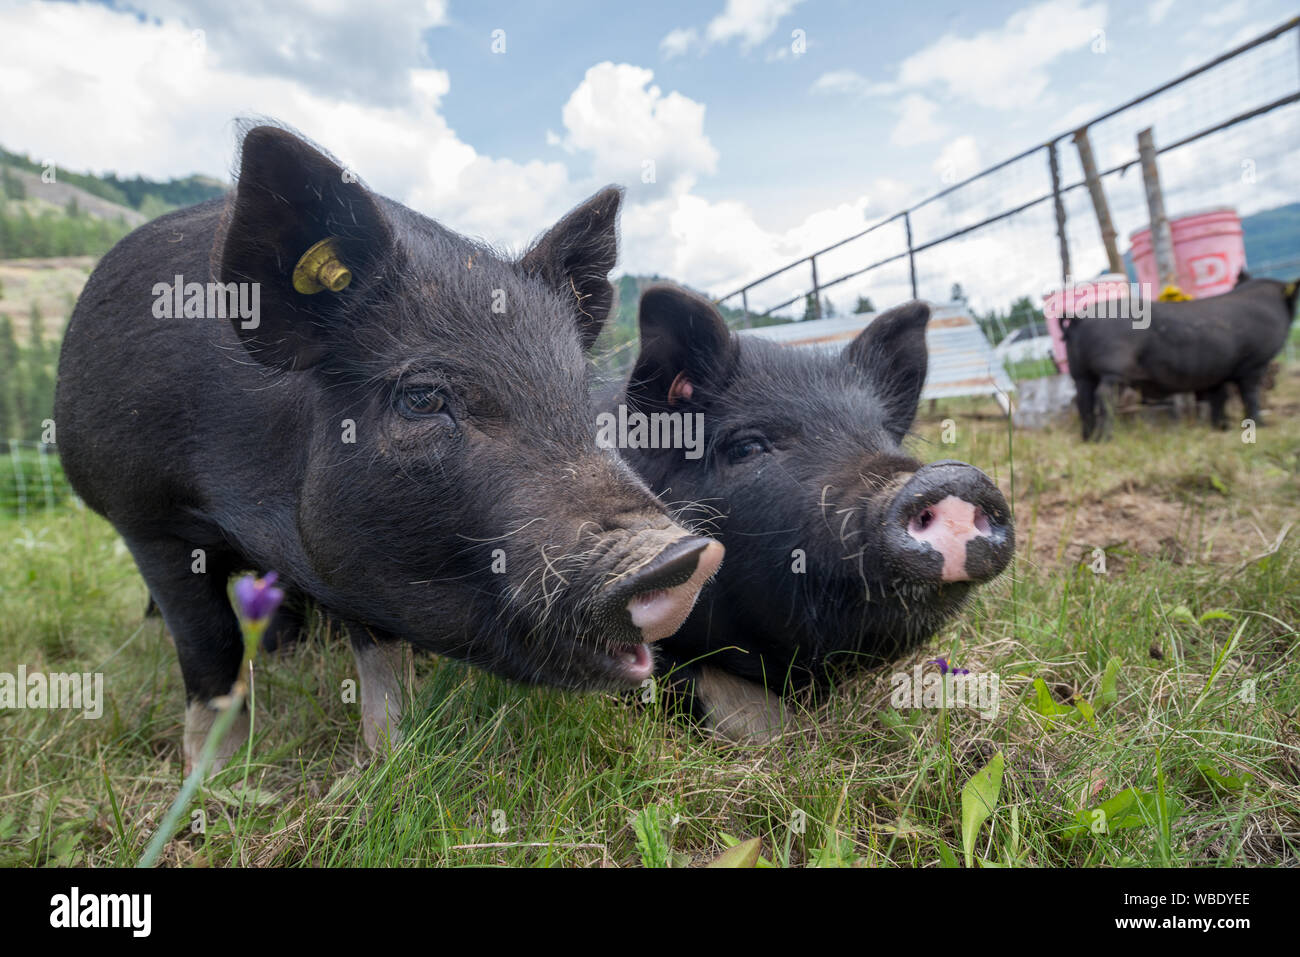 American Guinea hogs at the Minam River Lodge in Oregon's Wallowa Mountains. Stock Photo